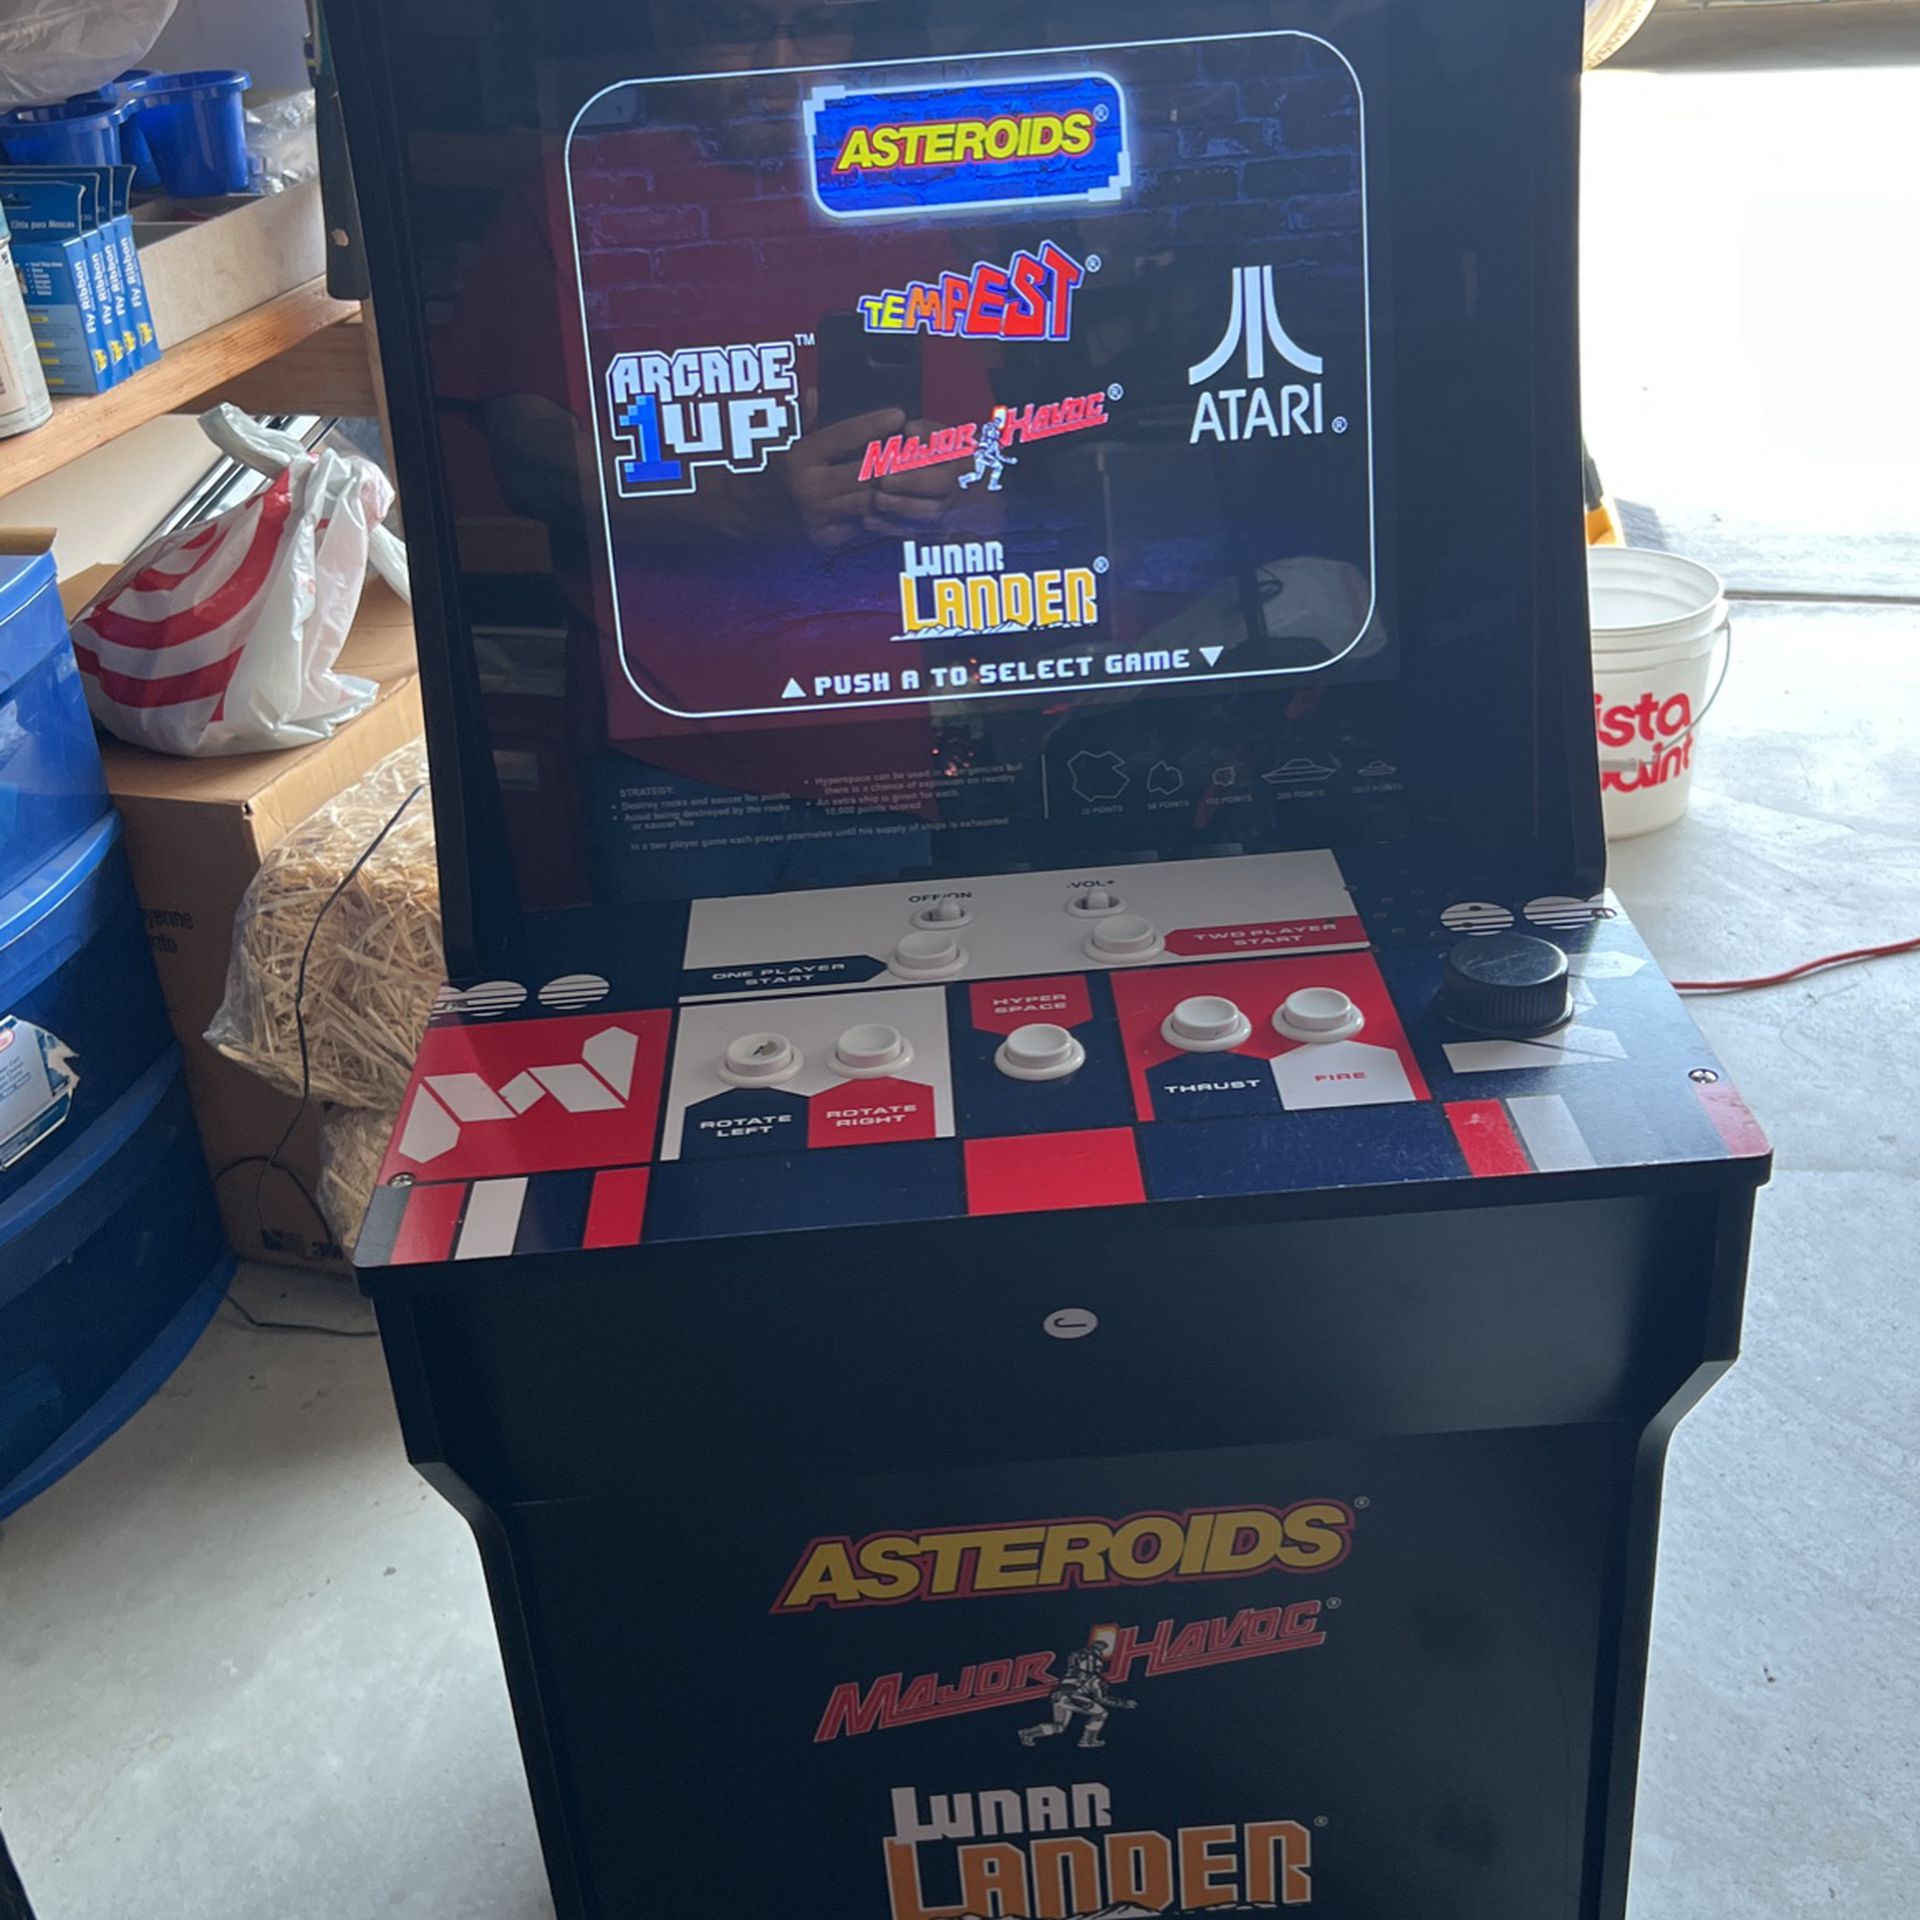 Asteroids Arcade Games, By ATARI. Like New